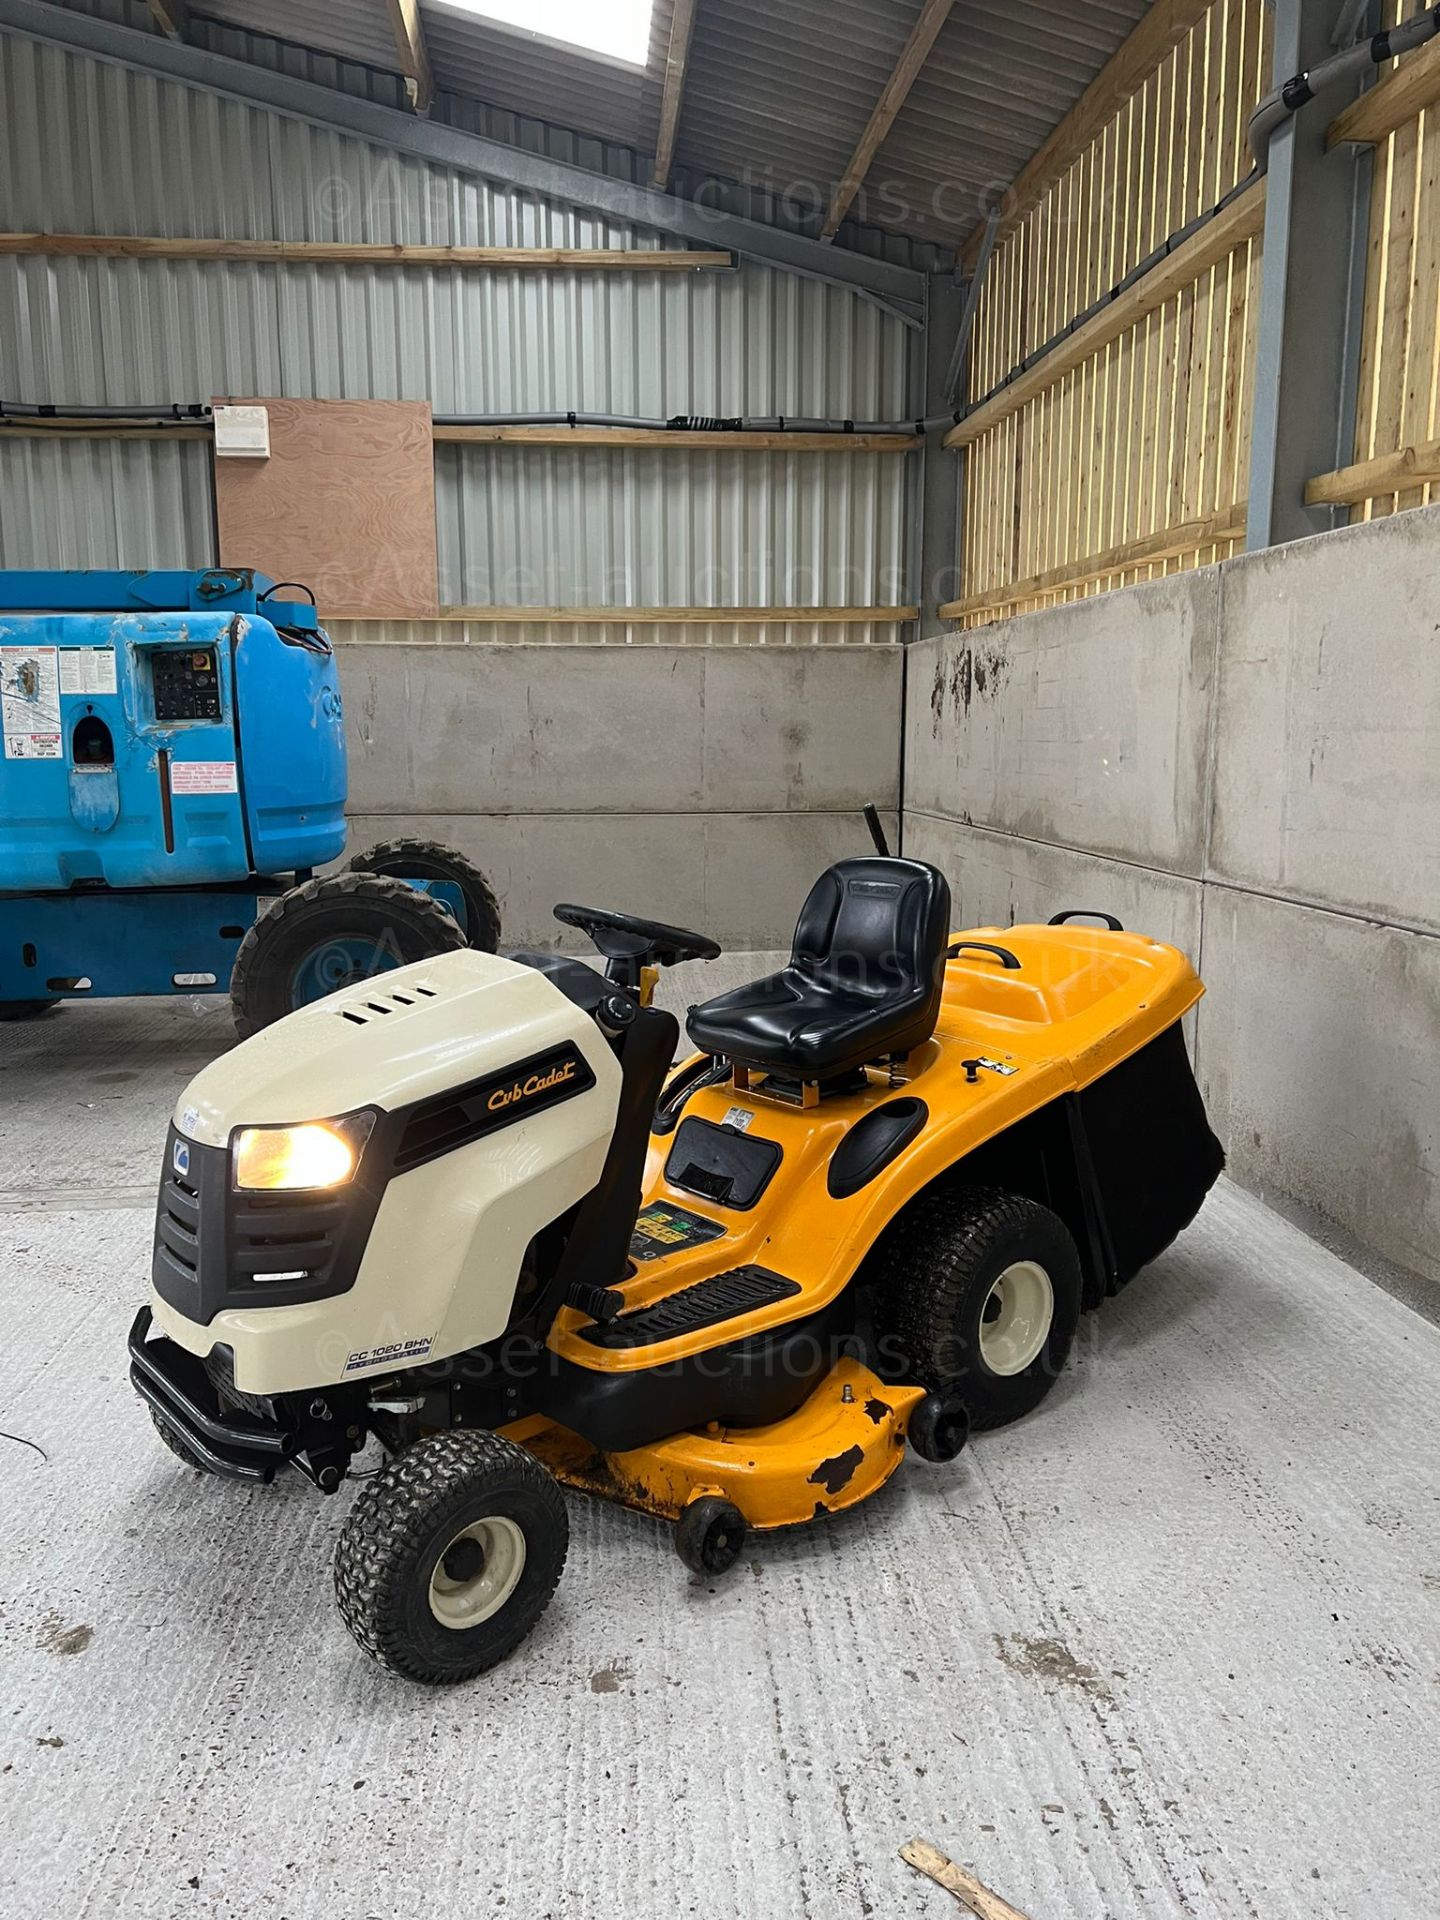 2015 CUB CADET 1020 RIDE ON LAWN MOWER, RUNS WORKS AND CUTS WELL, ONLY 250 HOURS FROM NEW *NO VAT* - Image 3 of 6